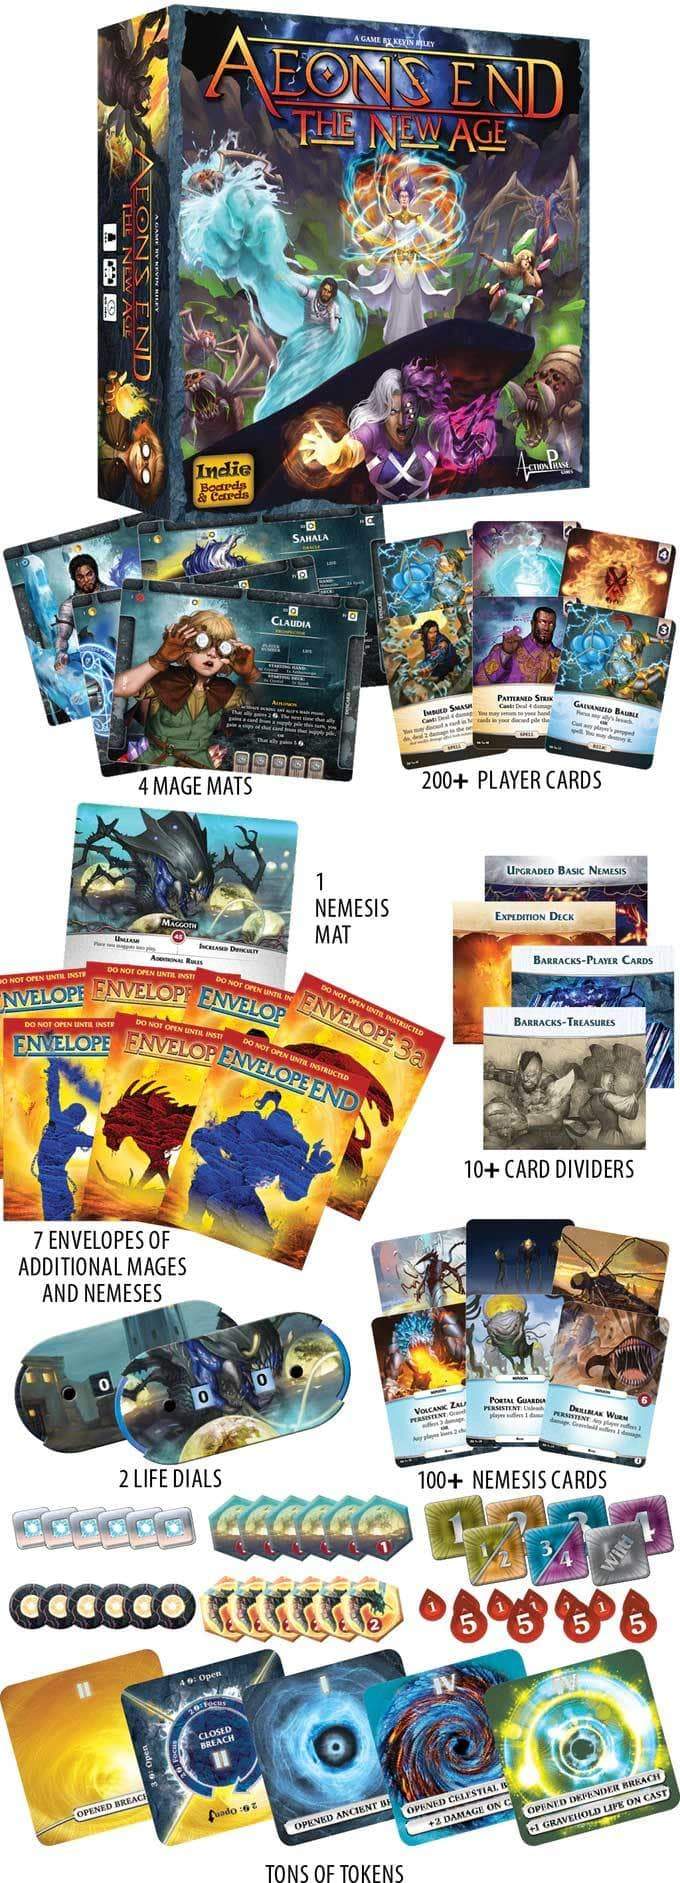 Aeon's End New Age: Tide Master Pledge Bundle (Kickstarter Pre-Order Special) Board Game Geek, Kickstarter Games, Games, Kickstarter Board Games, Board Games, Action Phase Games, Indie Boards Cards, Aeons End The New Age, The Games Steward Kickstarter Edition Shop, Card Drafting Action Phase Games